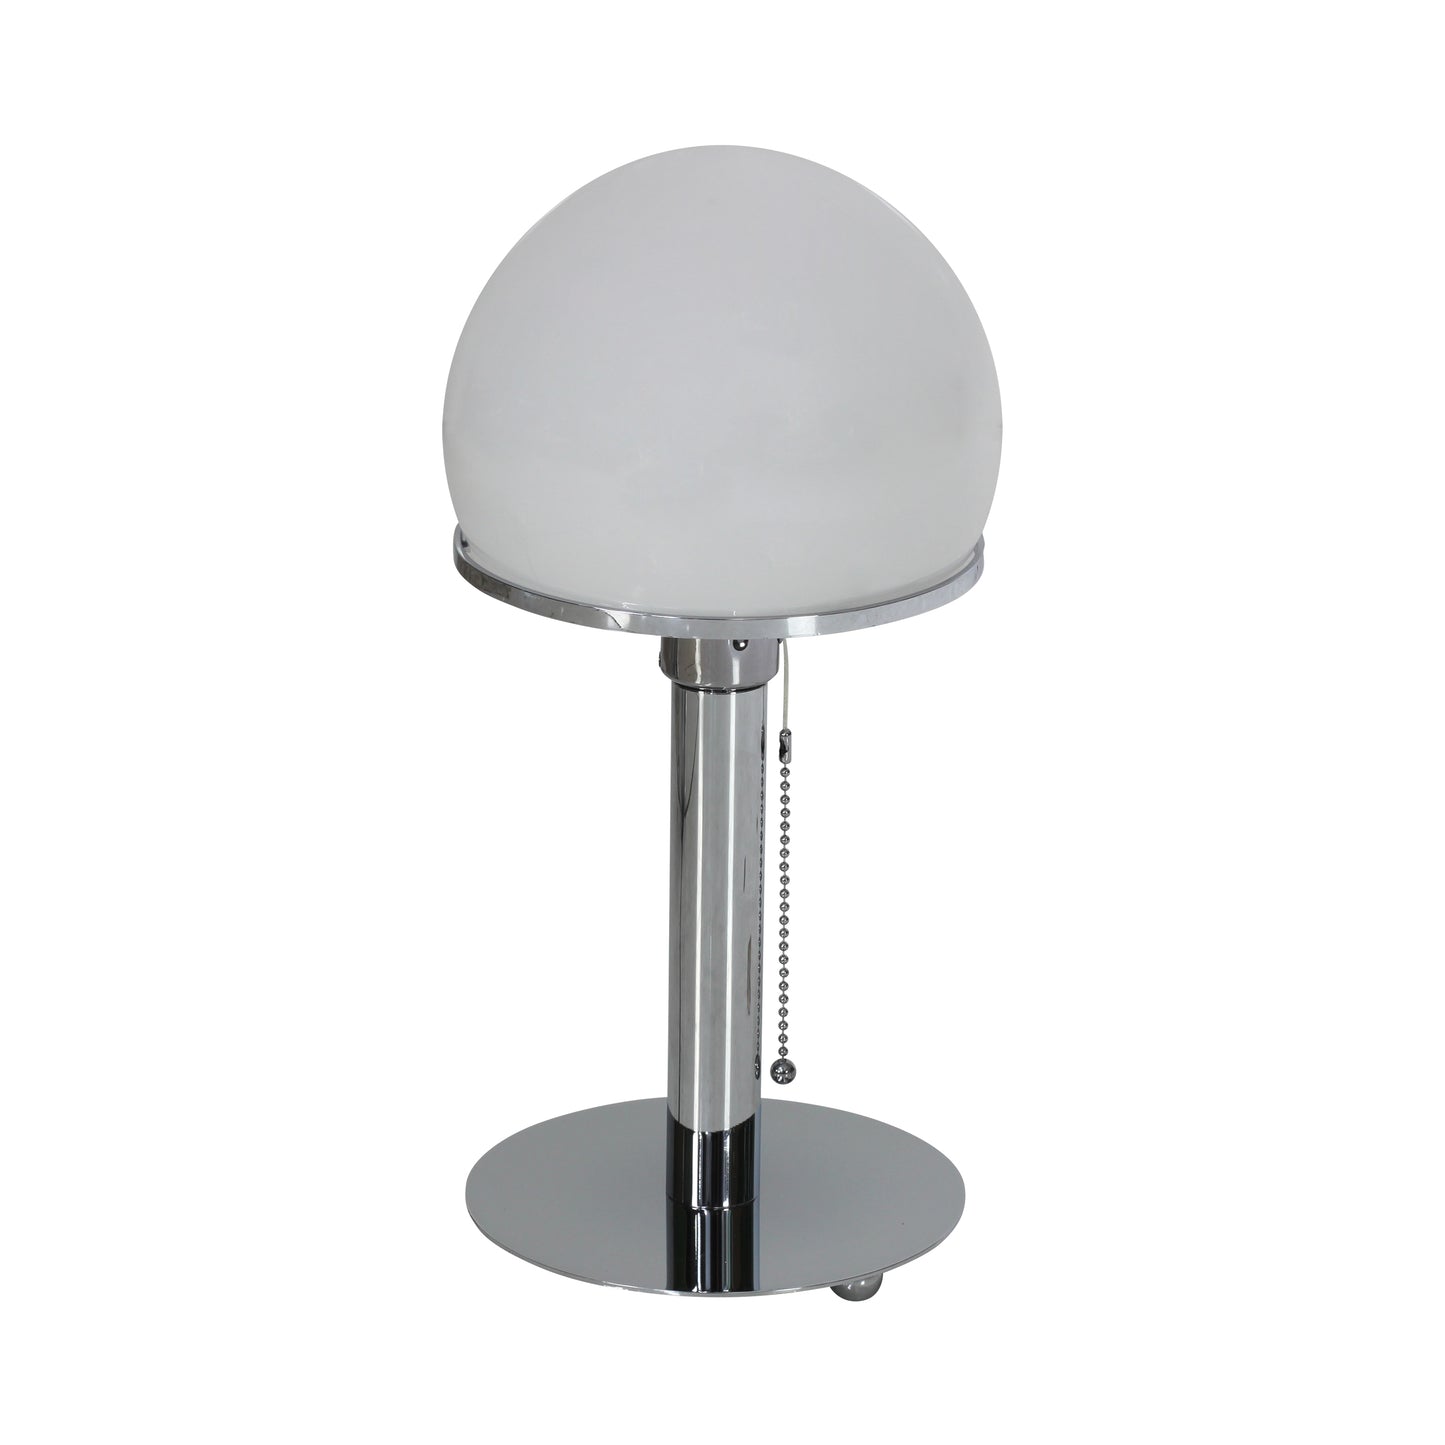 Wagenfeld lamp style | Front